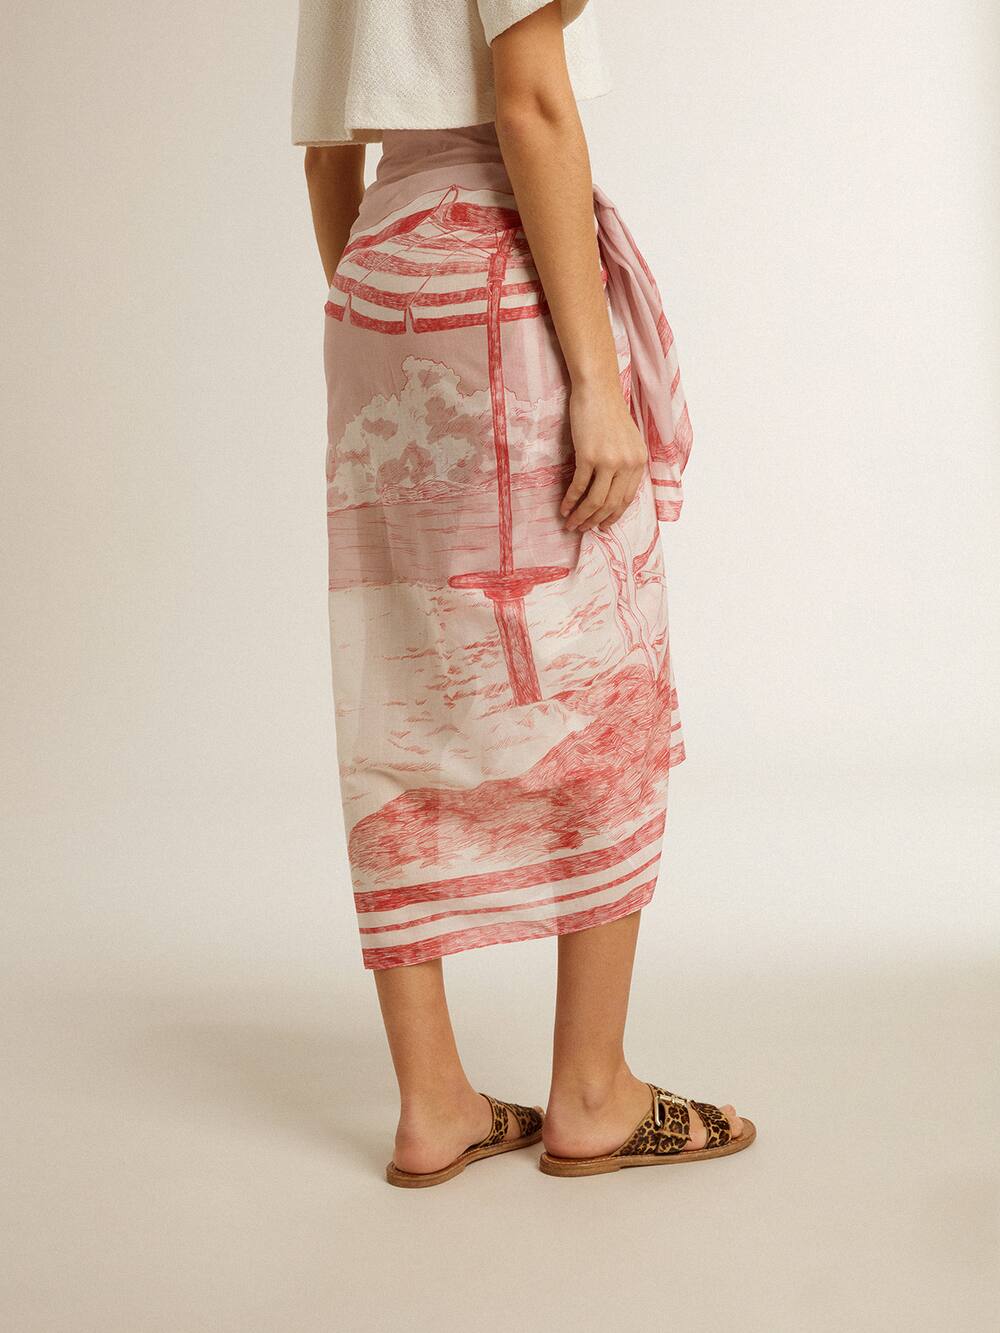 Golden Goose - Sarong in cotton voile with all-over cream and red print in 